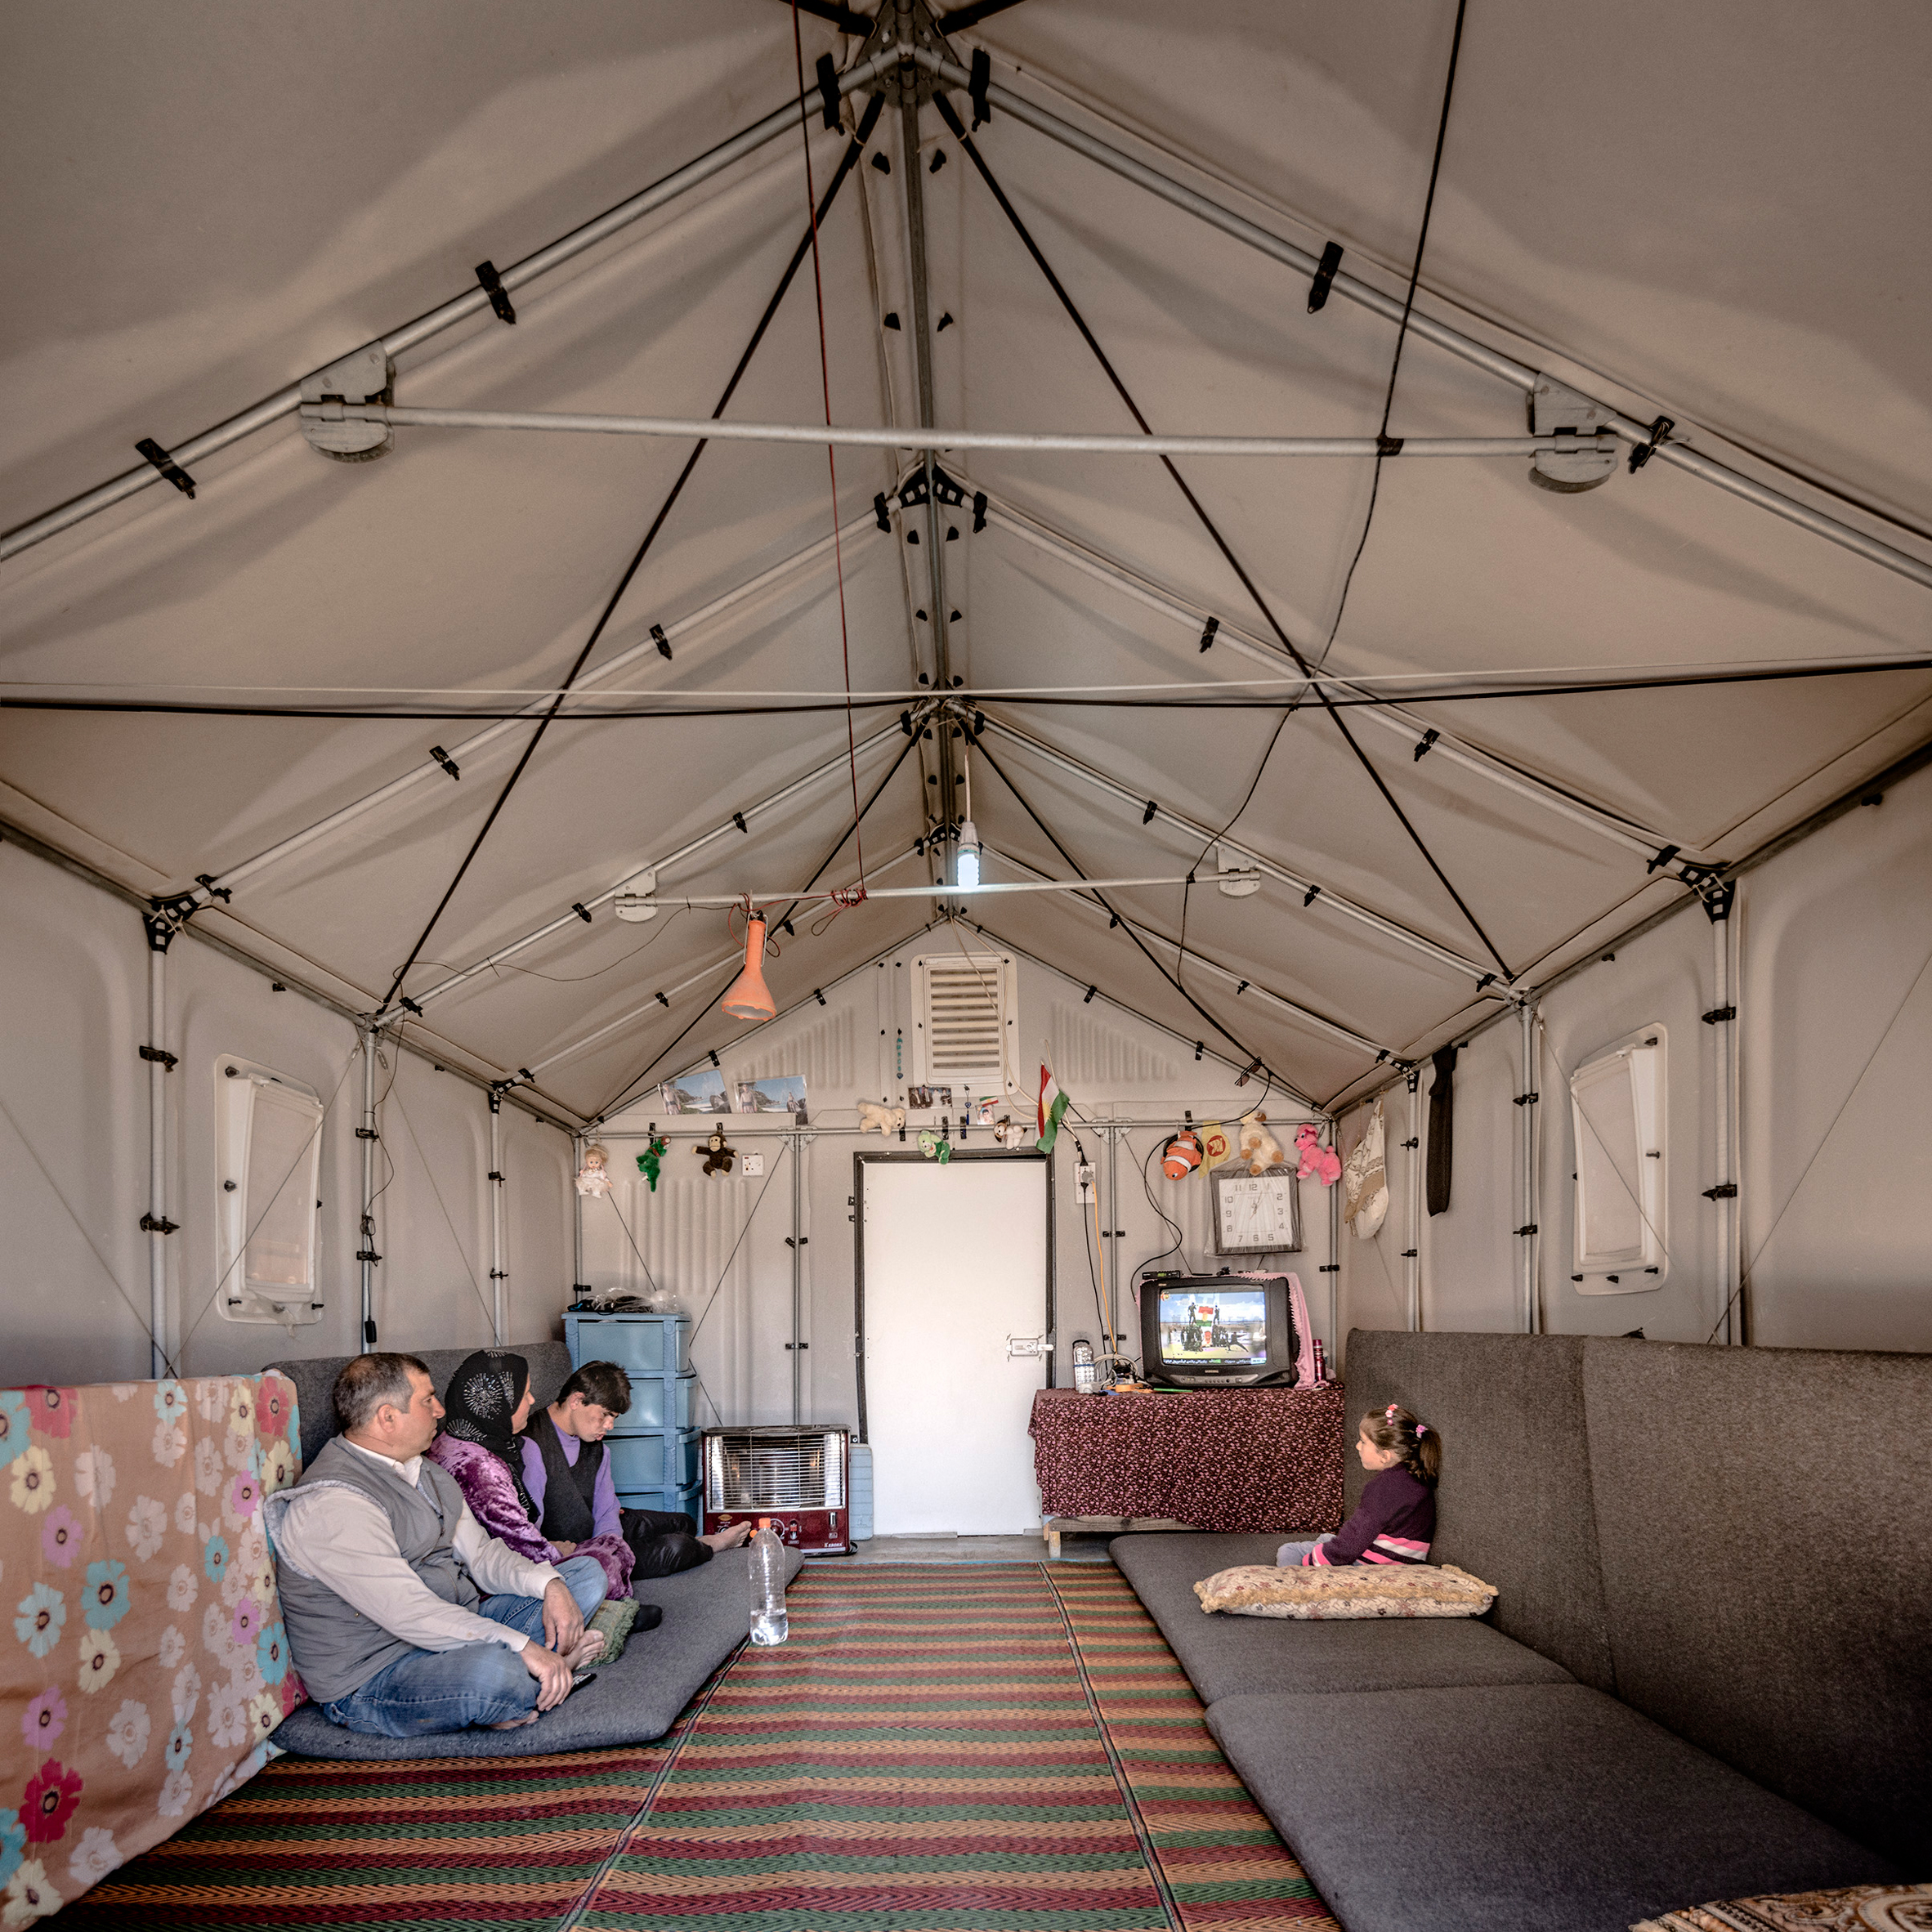 10 of the best designs that address the refugee crisis